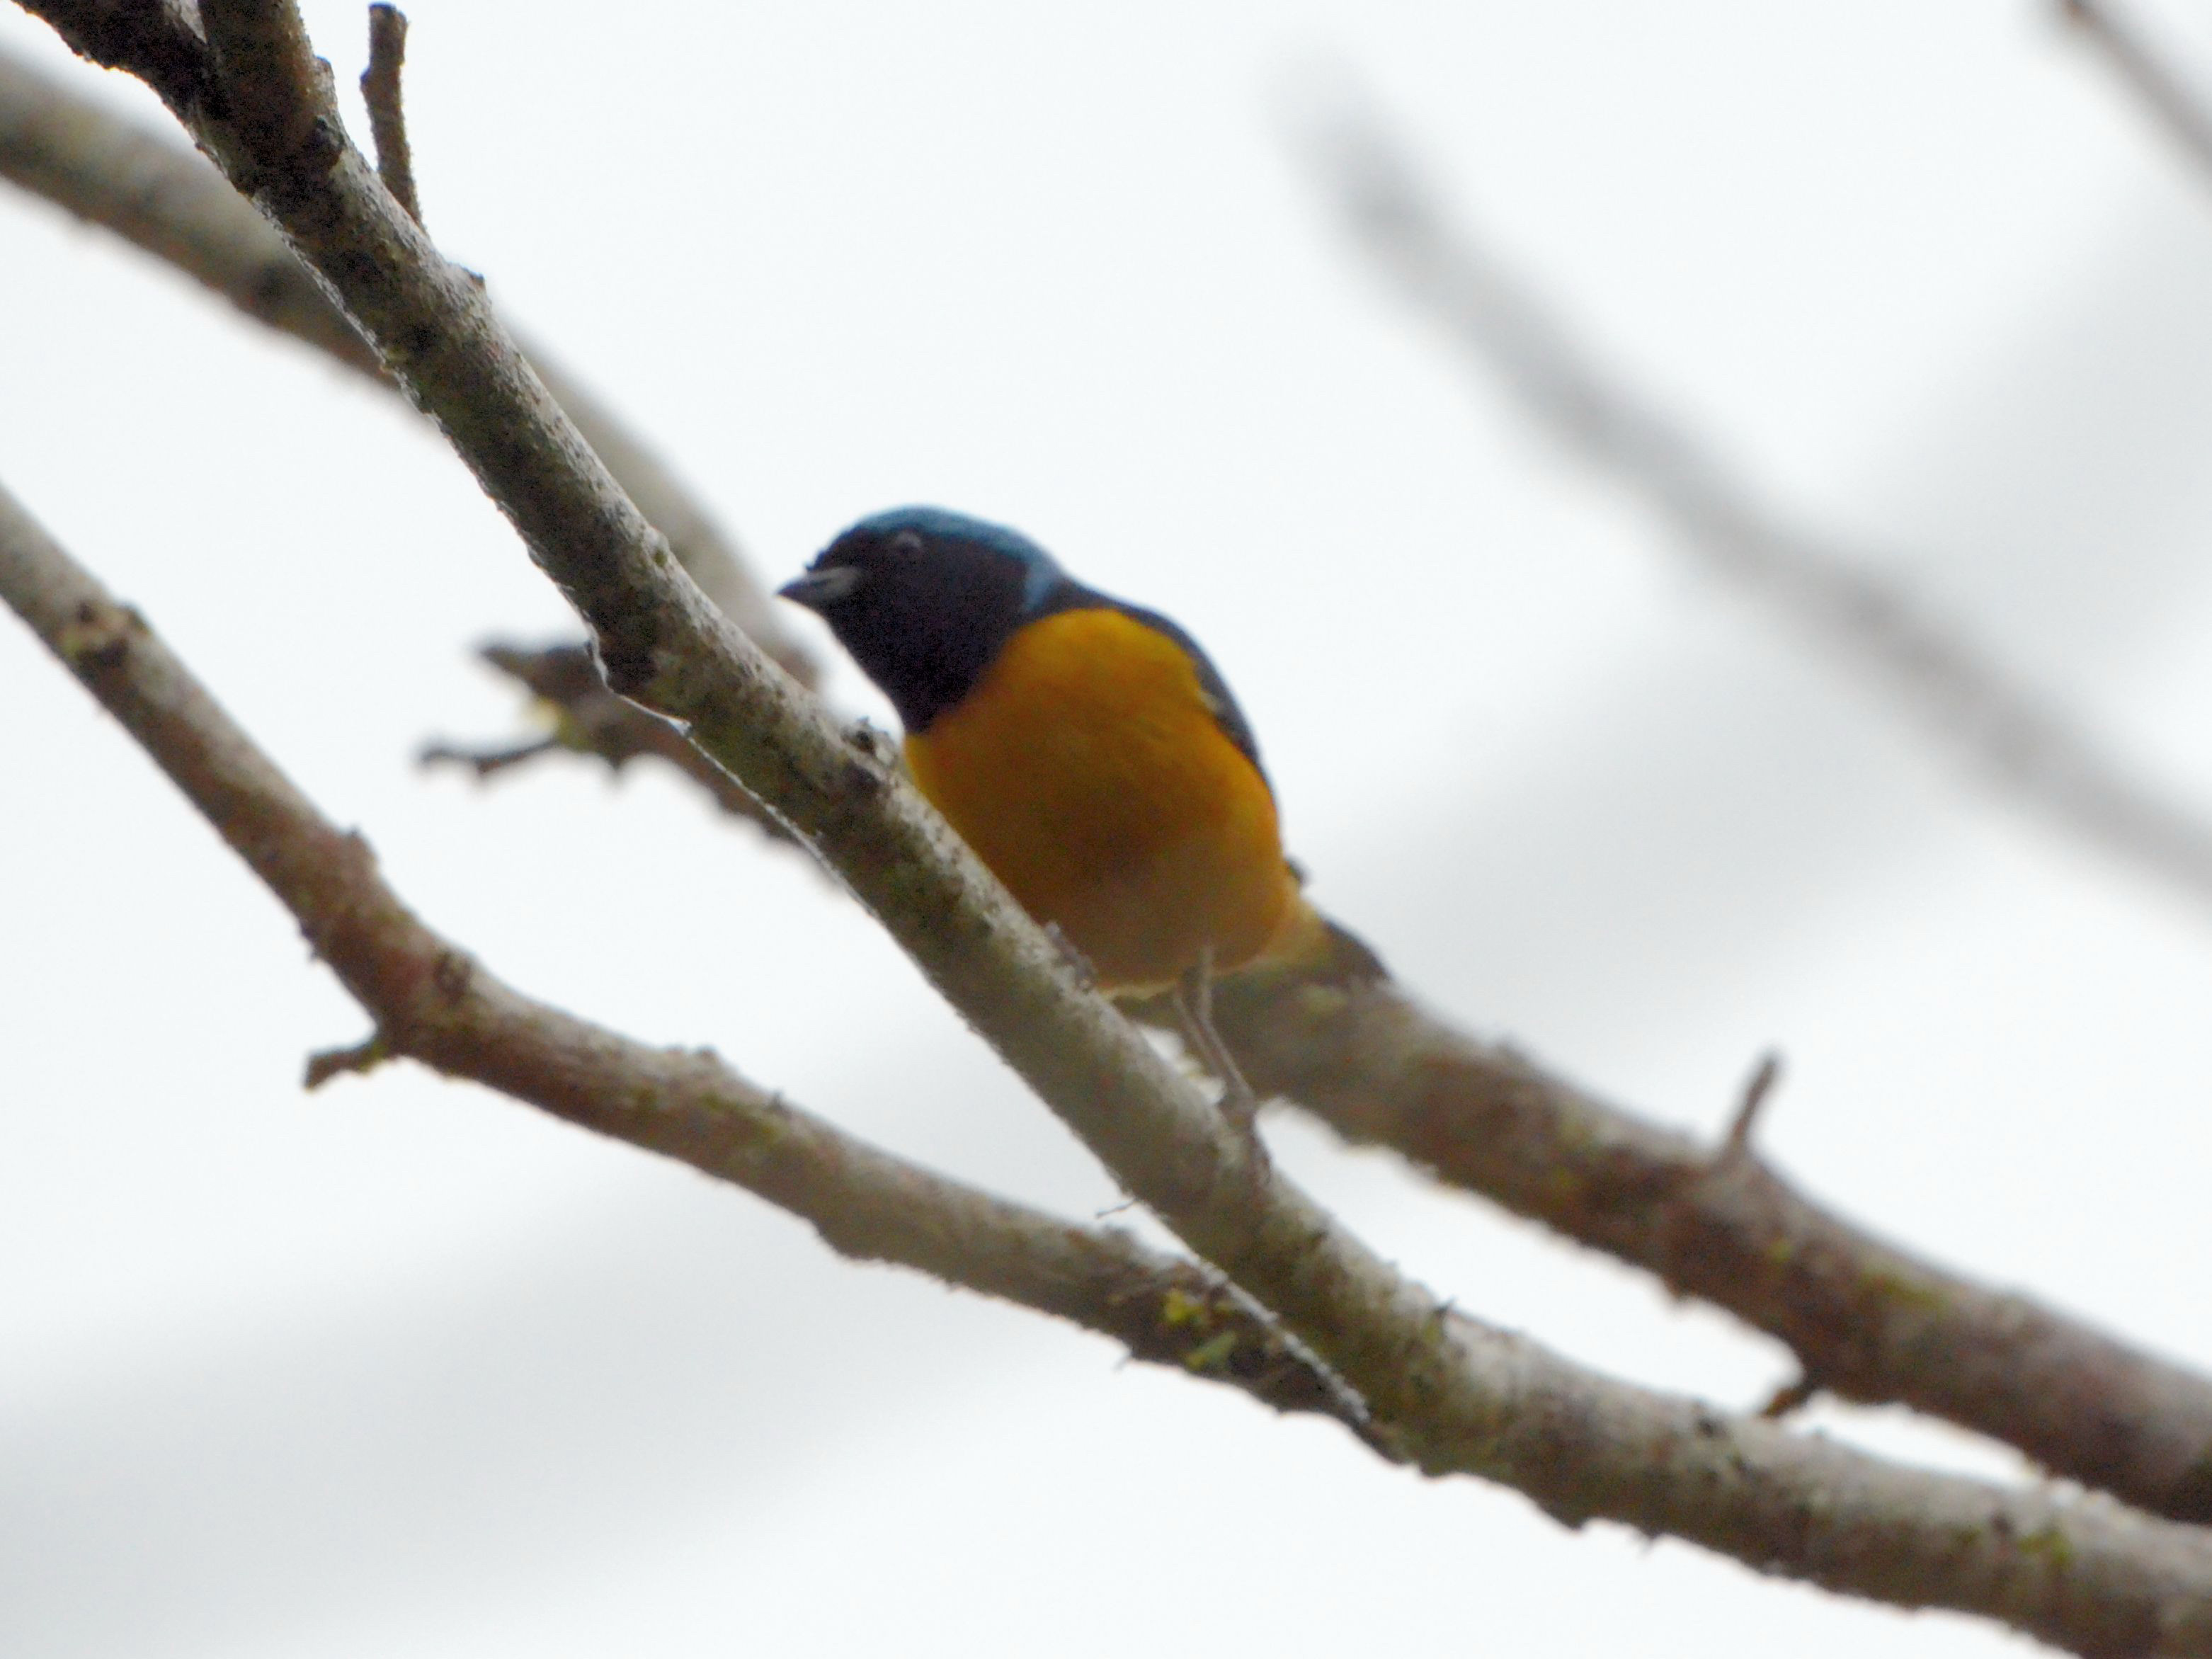 Click picture to see more Golden-rumped Euphonias.